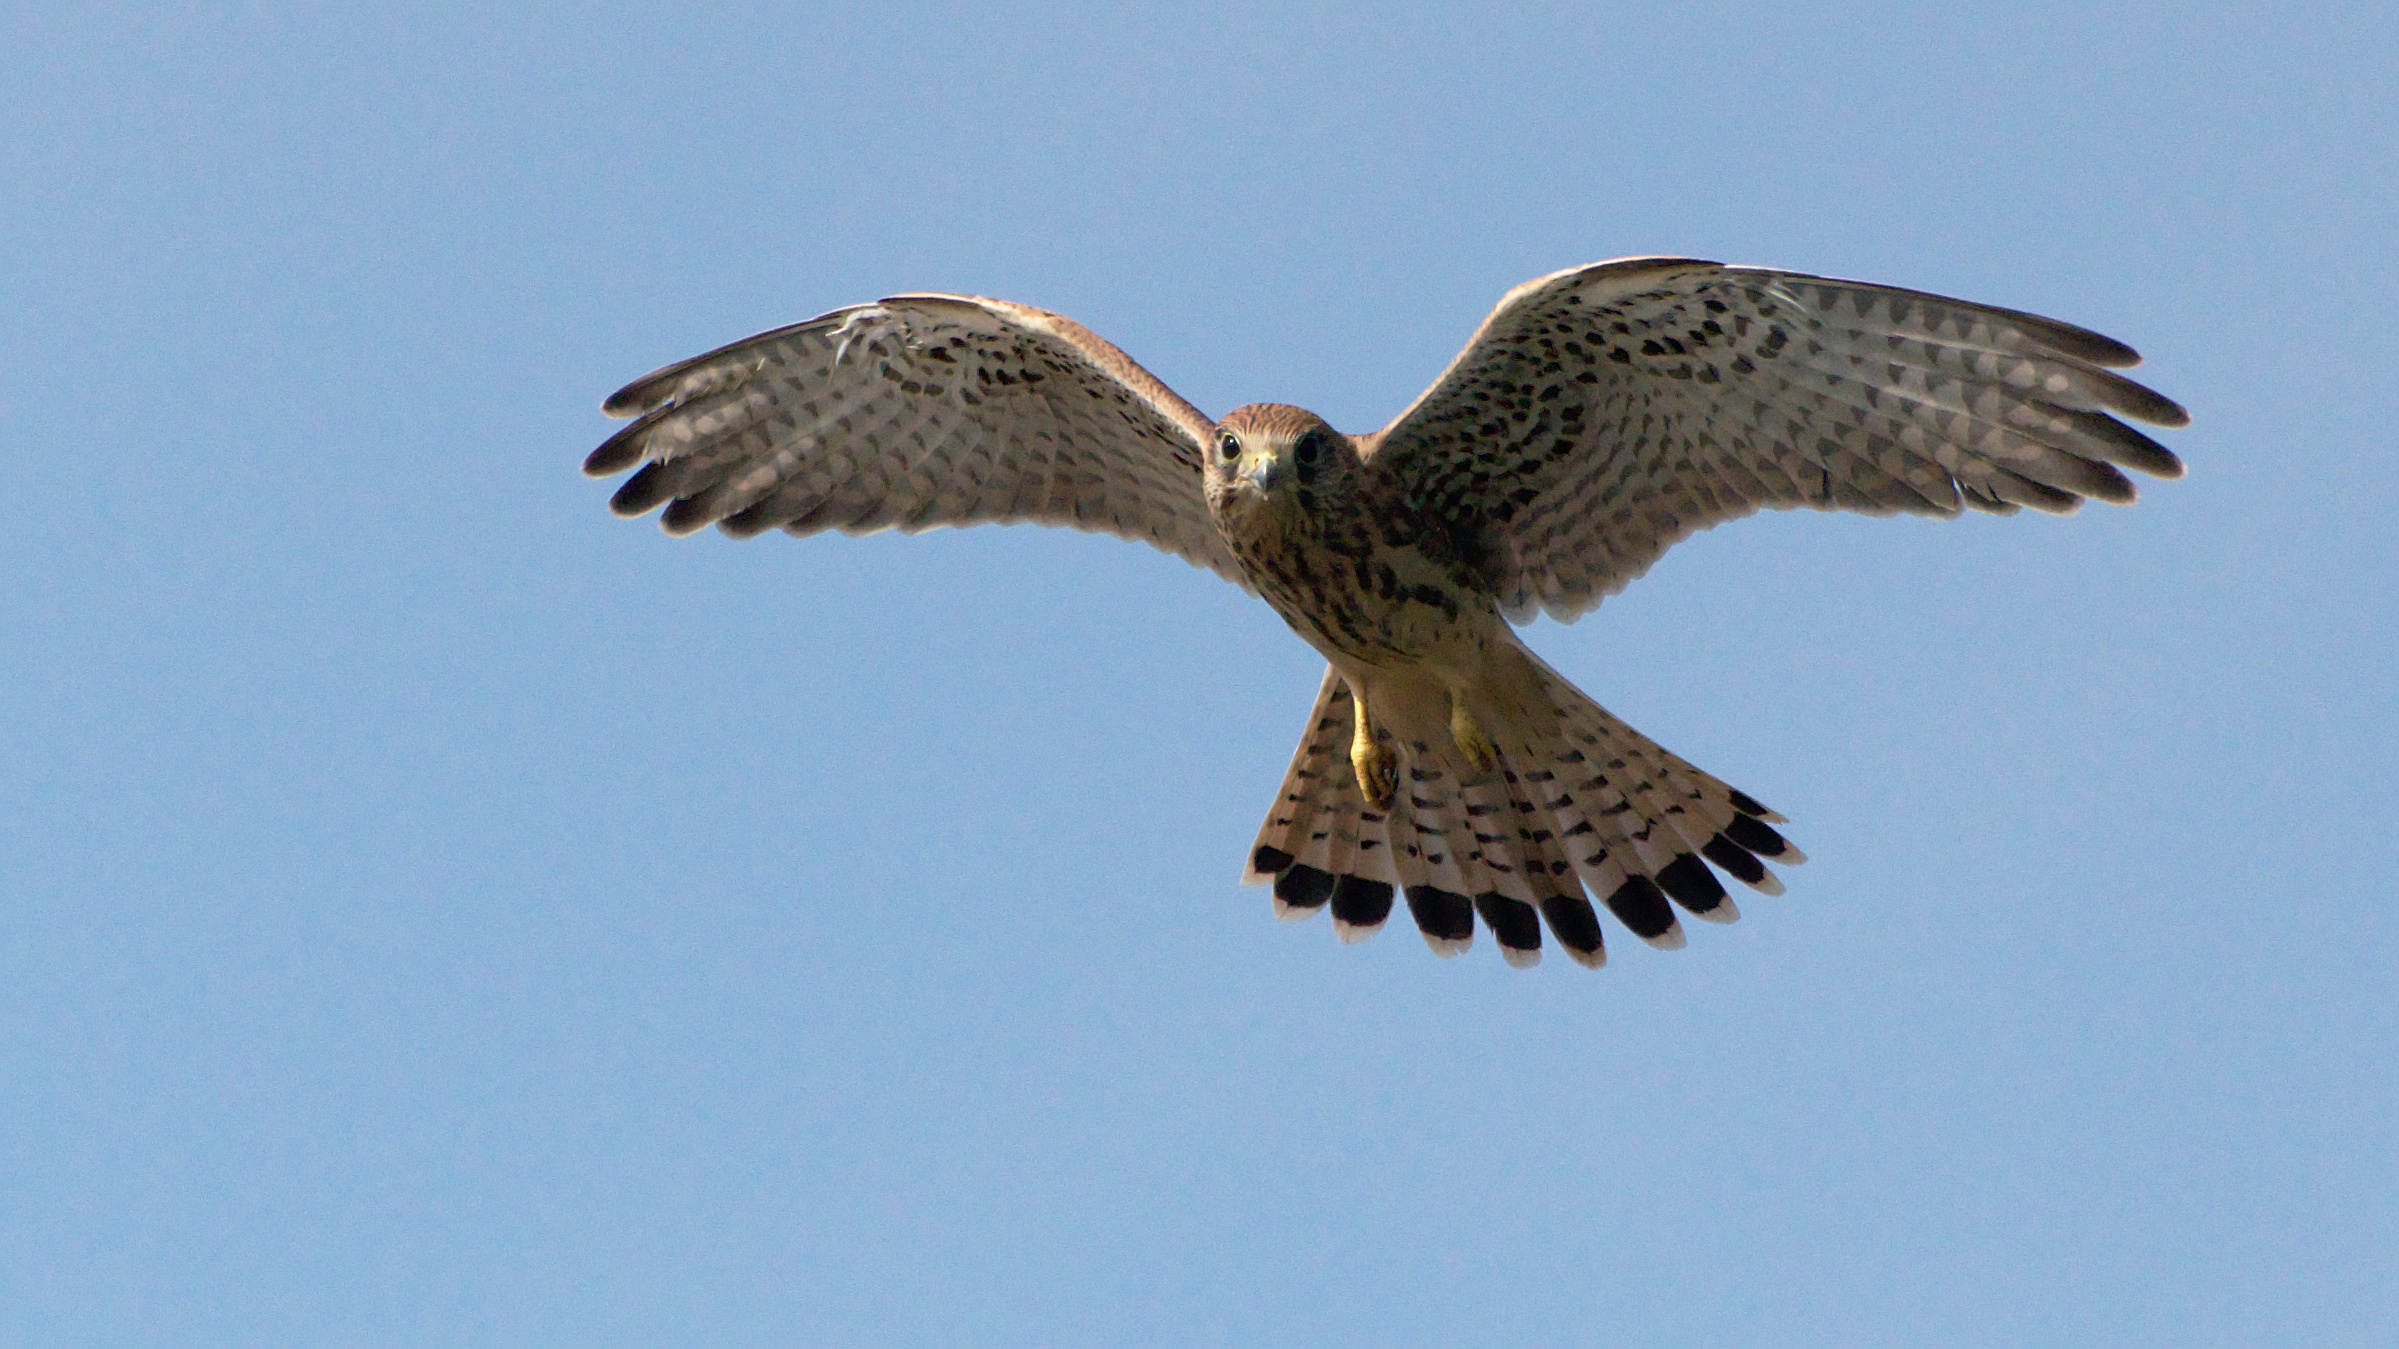 Kestrel head-on with wings spread and tail fanned